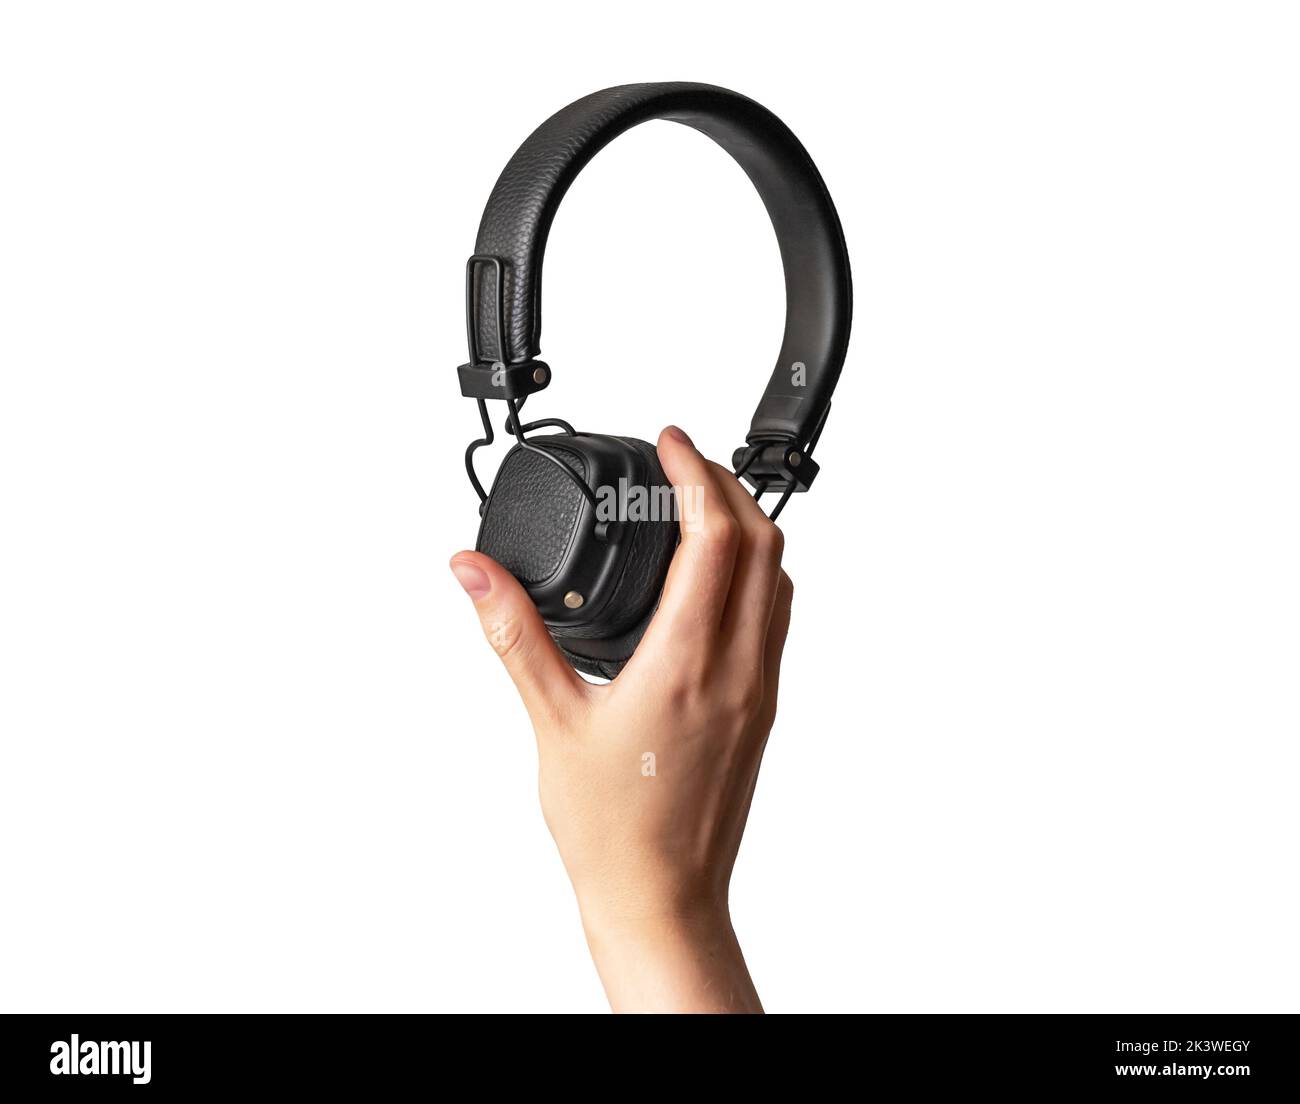 Black headphones in hand isolated on white. High quality photo Stock Photo